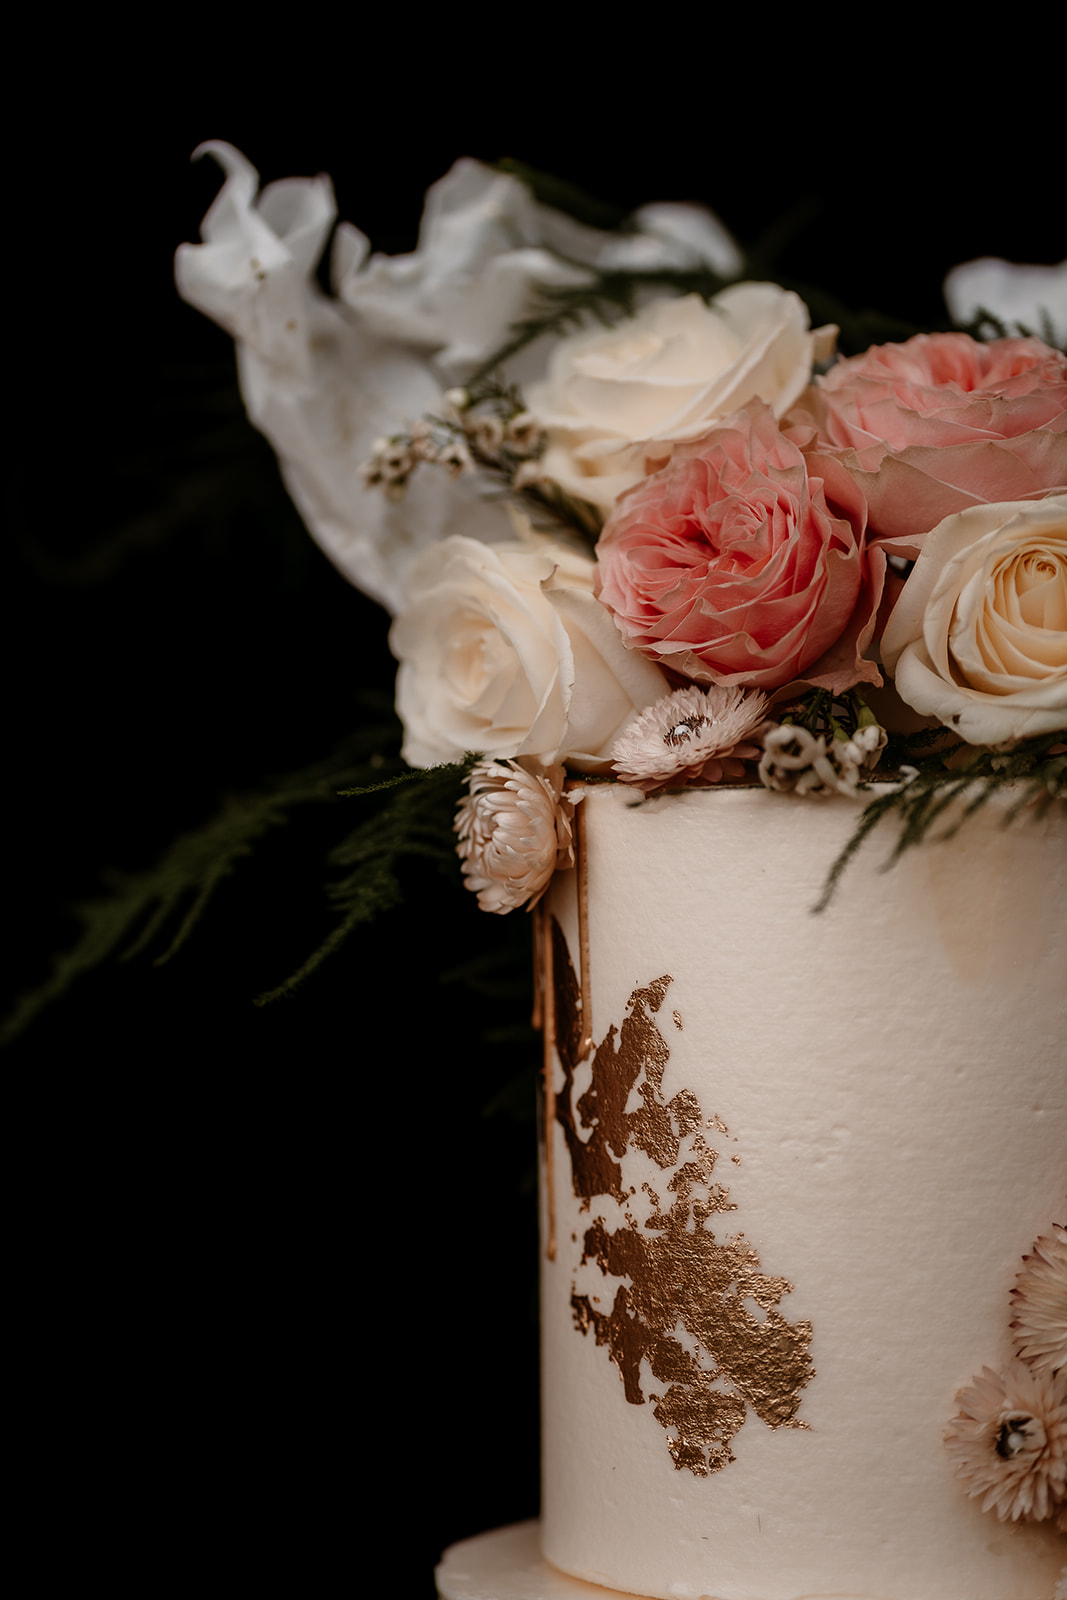 close up of a Three tier wedding cake in peachy tones with gold leaf decoration and floral topper